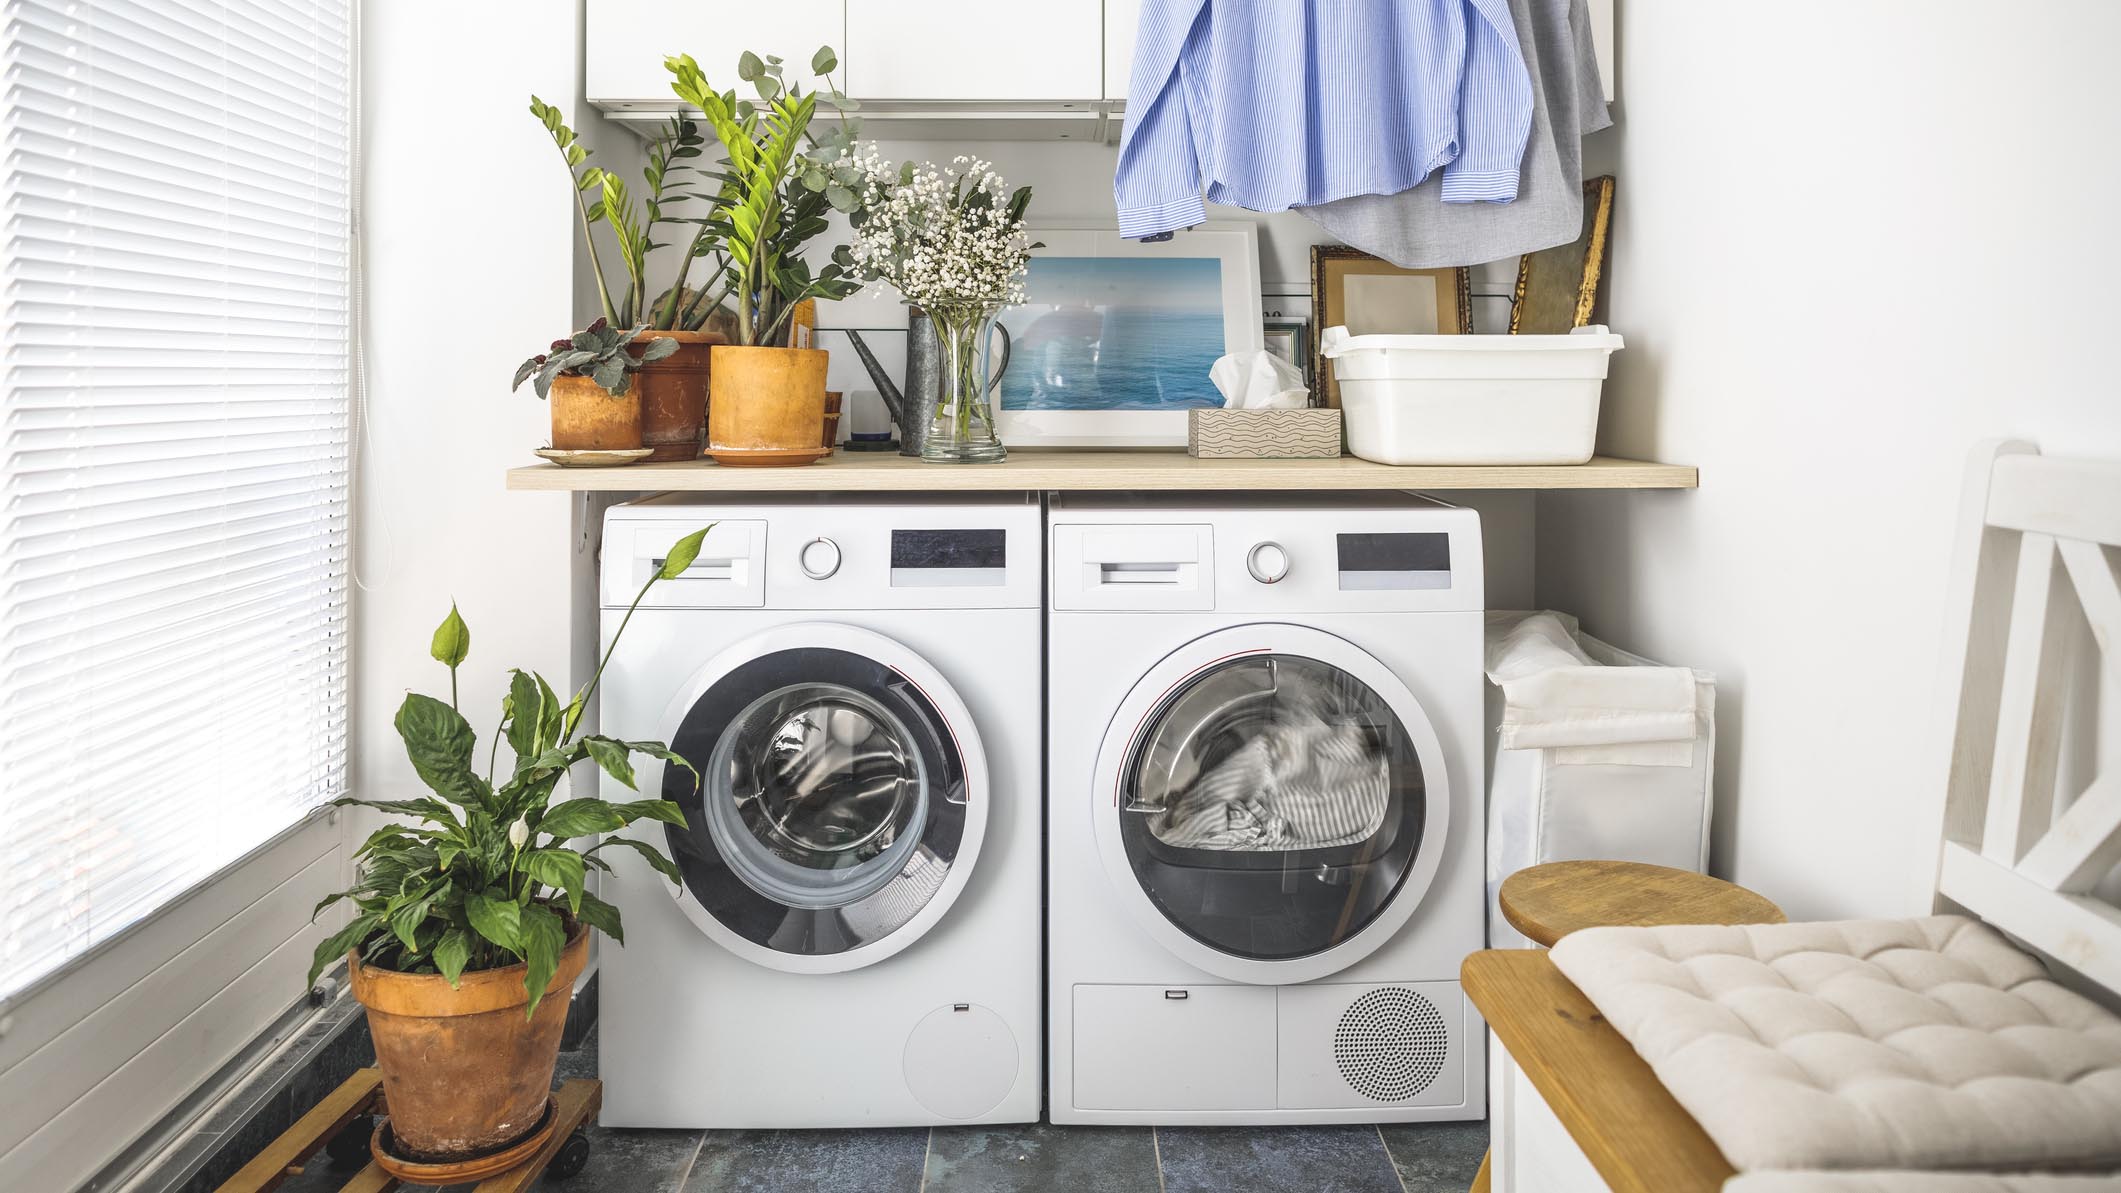 Image shows a washing machine and dryer set in a stylish laundry room filled with plants